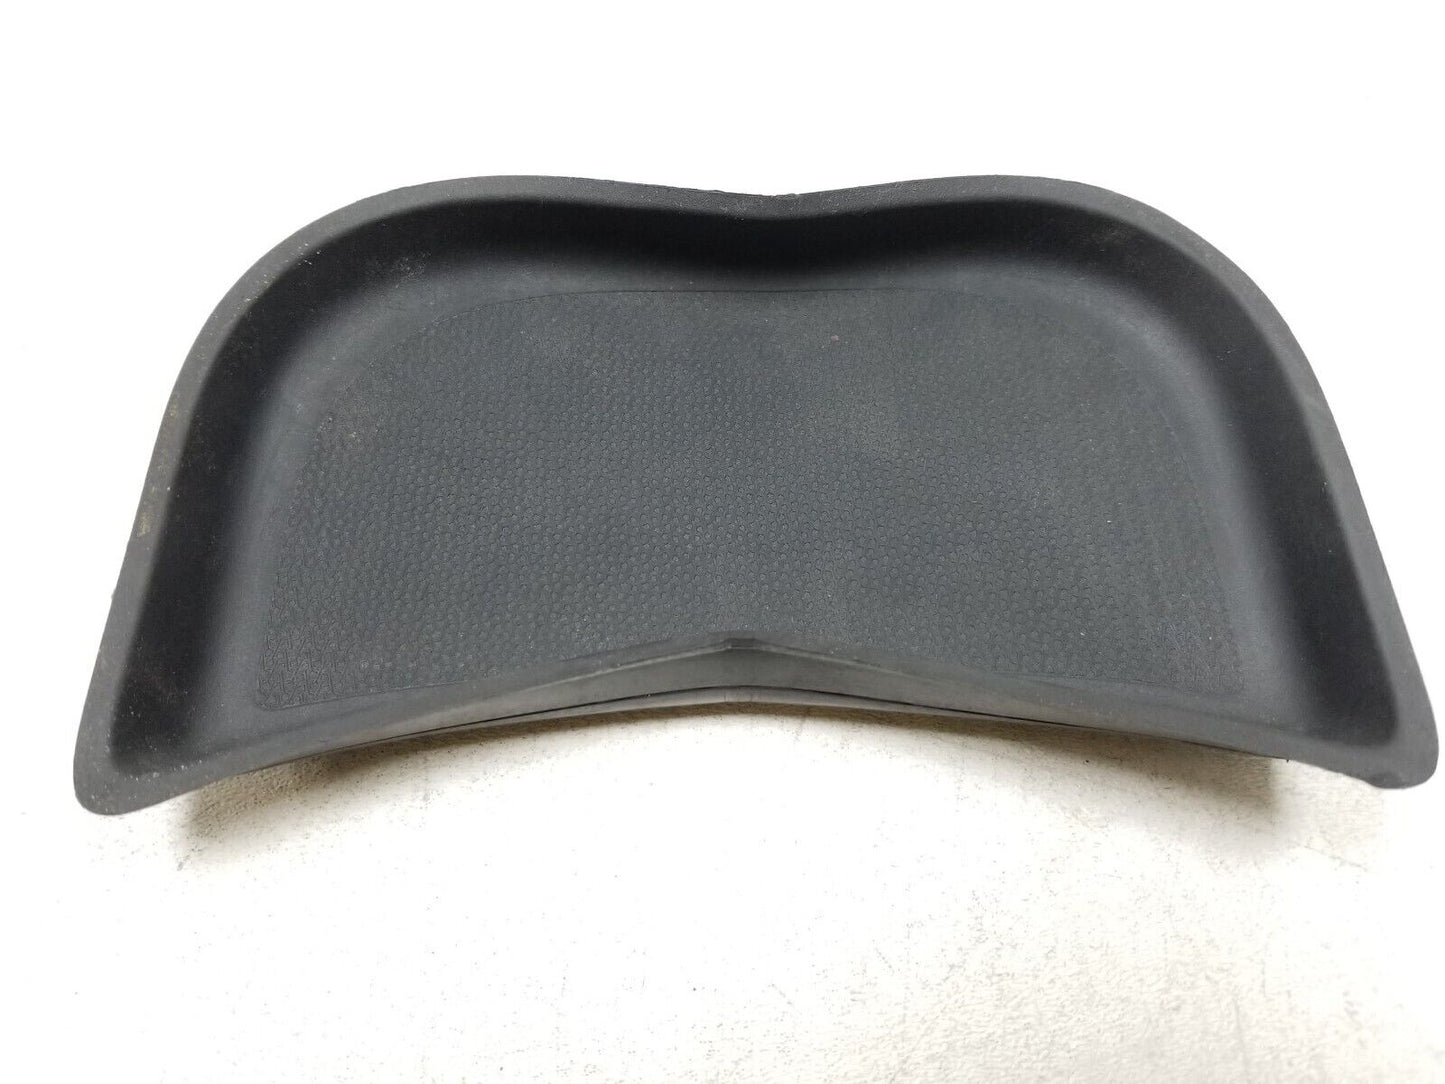 16 - 22 Dodge Durango Center Console Rear Dual Cup Holder Cupholder OEM